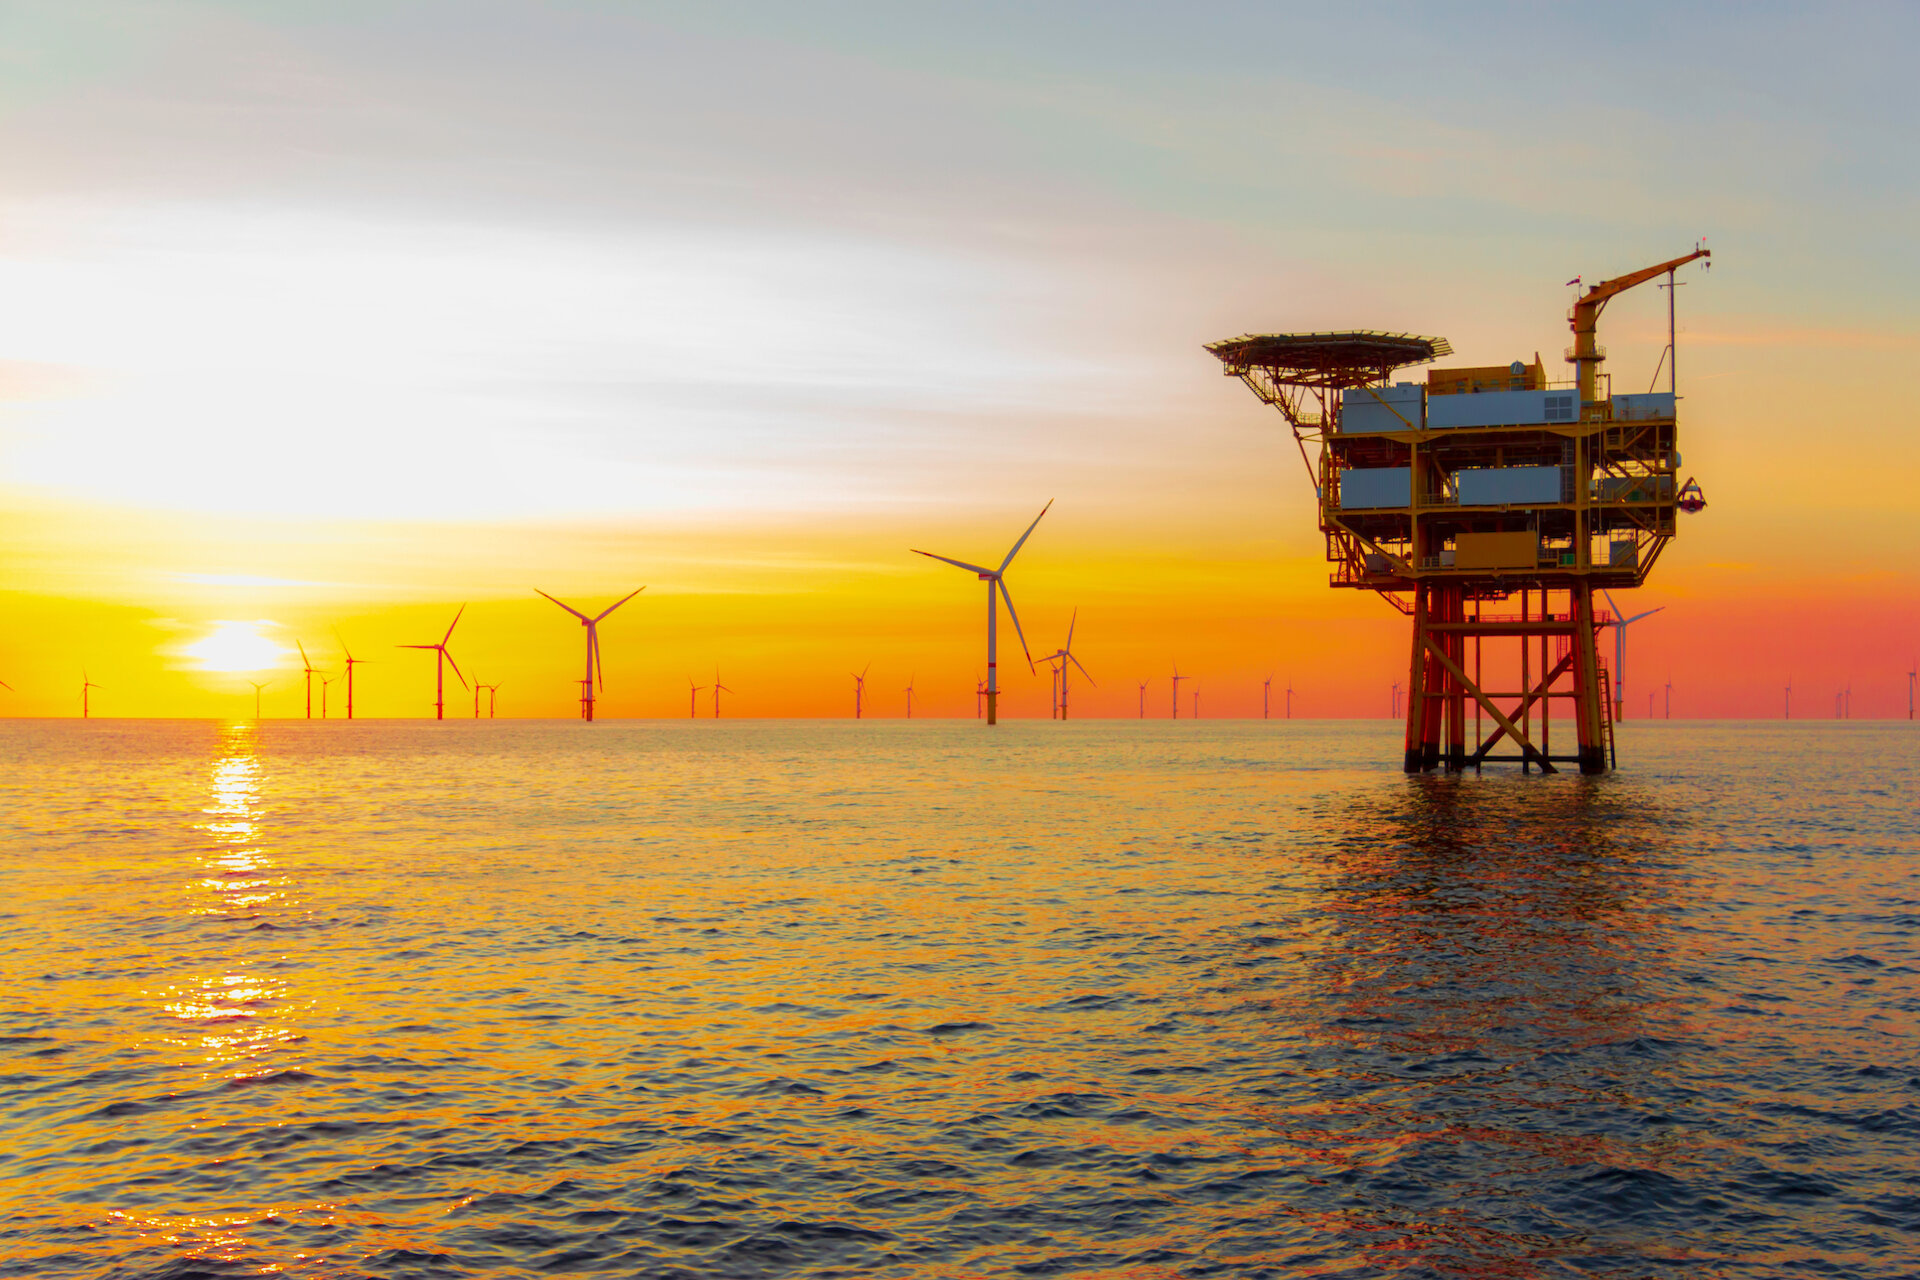 Infrastructure developed for decommissioning will also support offshore wind farms.